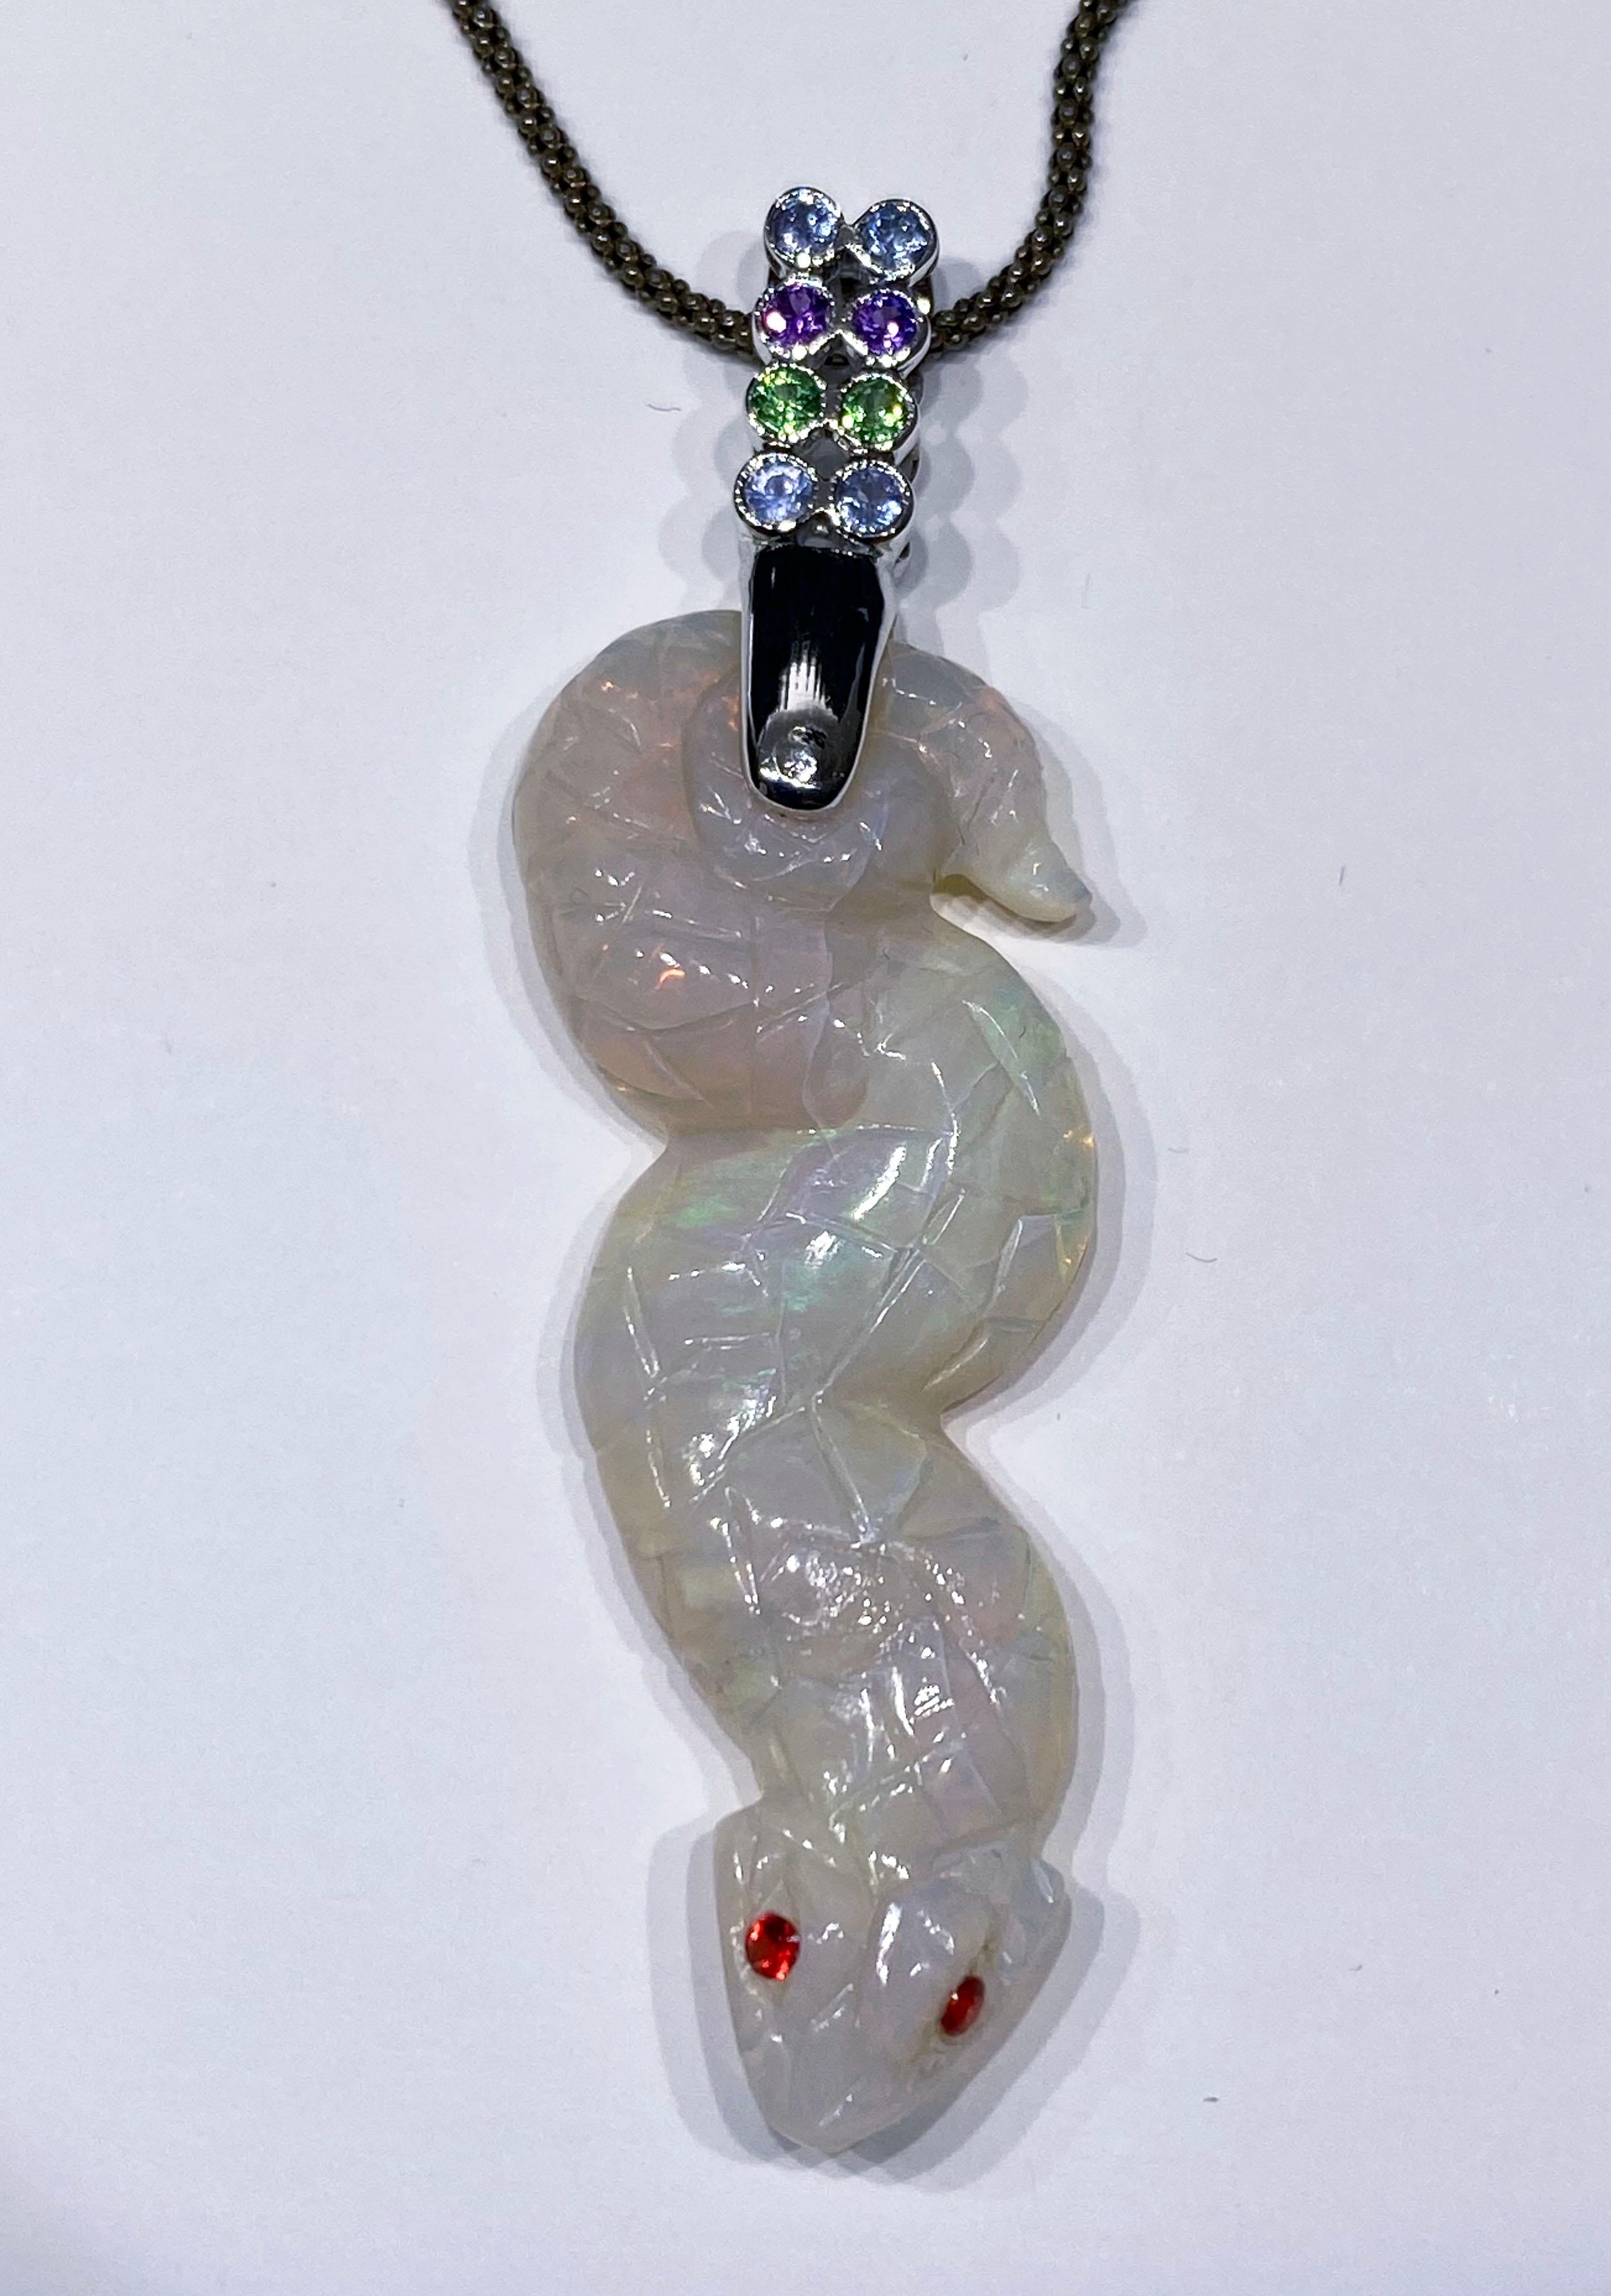 18kt White Gold Pendant with a Carved Opal Snake of 17 Carats Adorned with 8 Sapphire Rounds of 0.34 Carats in Blue Purple and Green. Hanging from a Blackened Silver Chain of 17